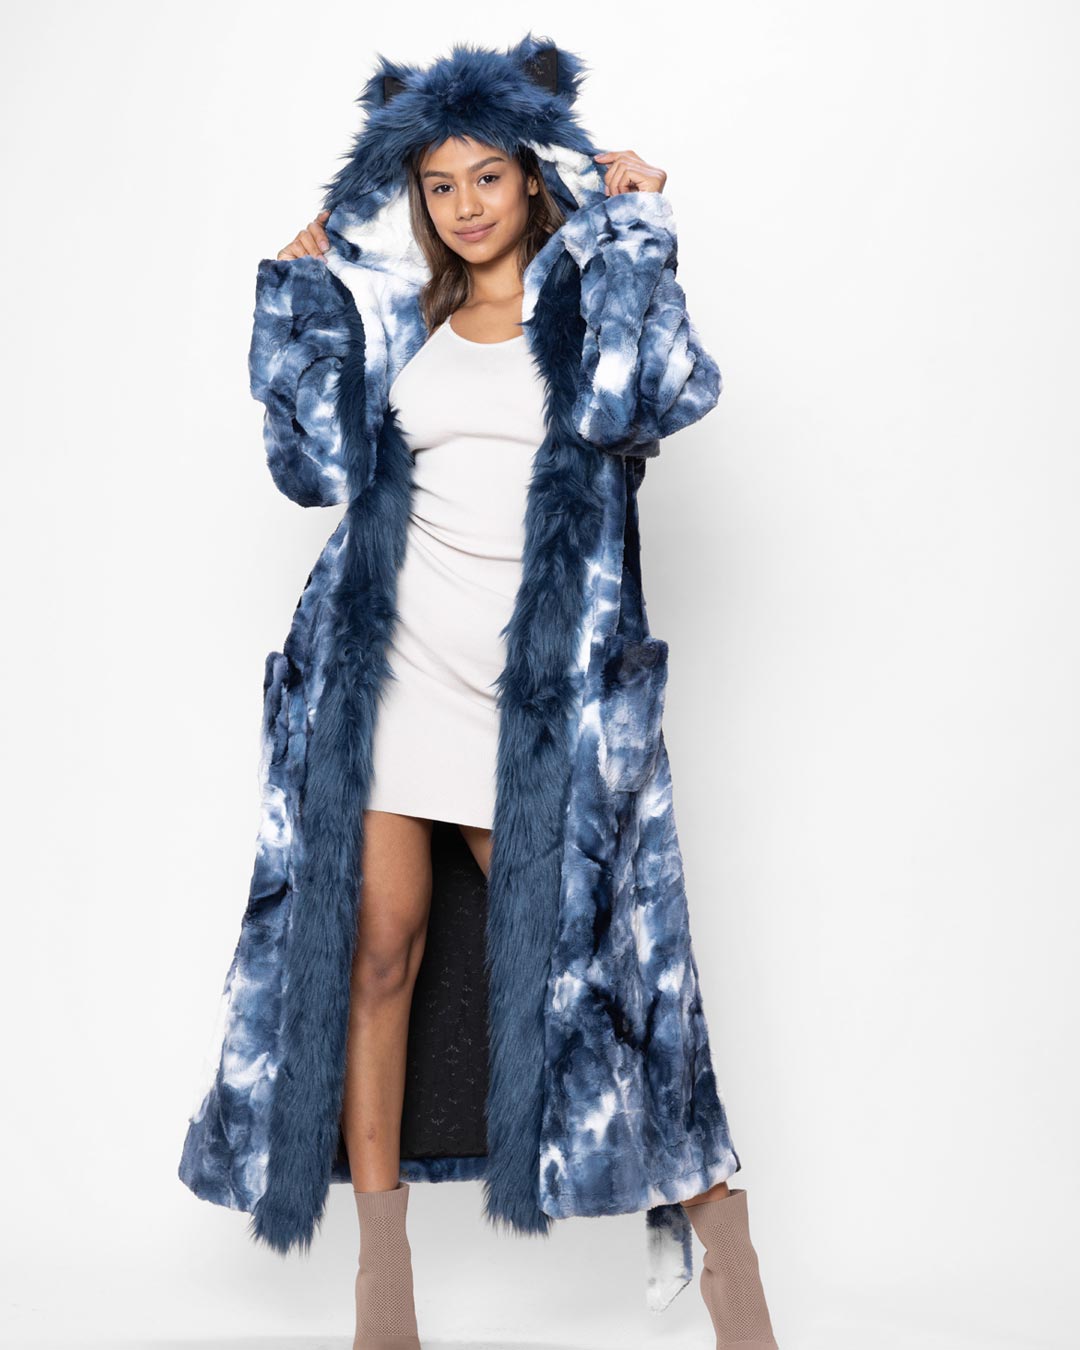 Blonde Model Holding Ears on Hood of Classic Faux Fur Robe Featuring Water Wolf Design